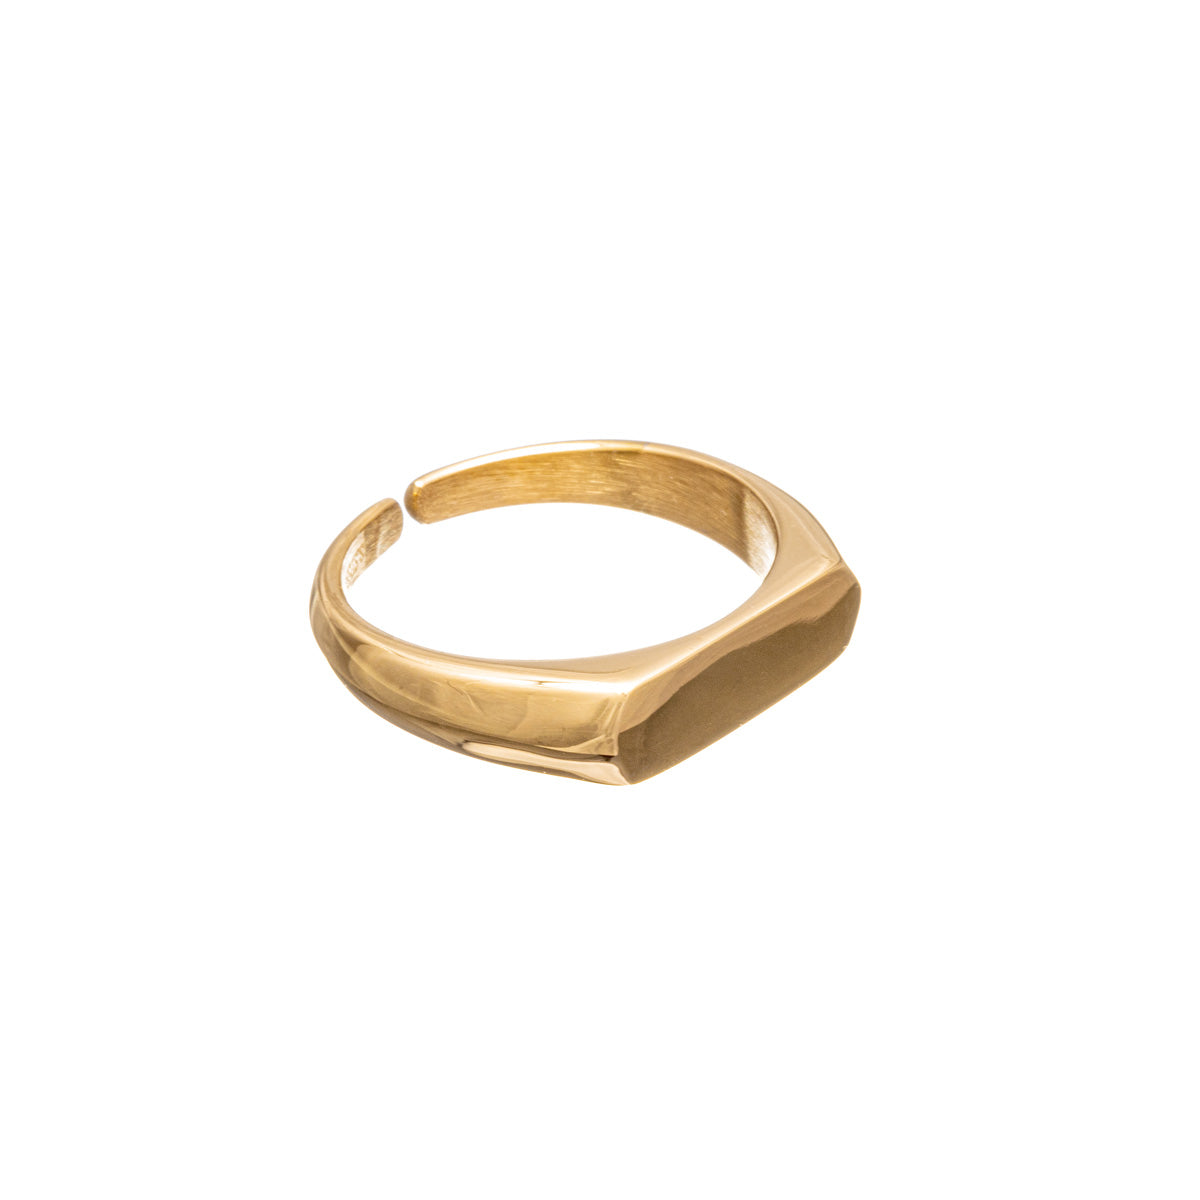 Low gold plated steel wedding ring (Steel 316L)